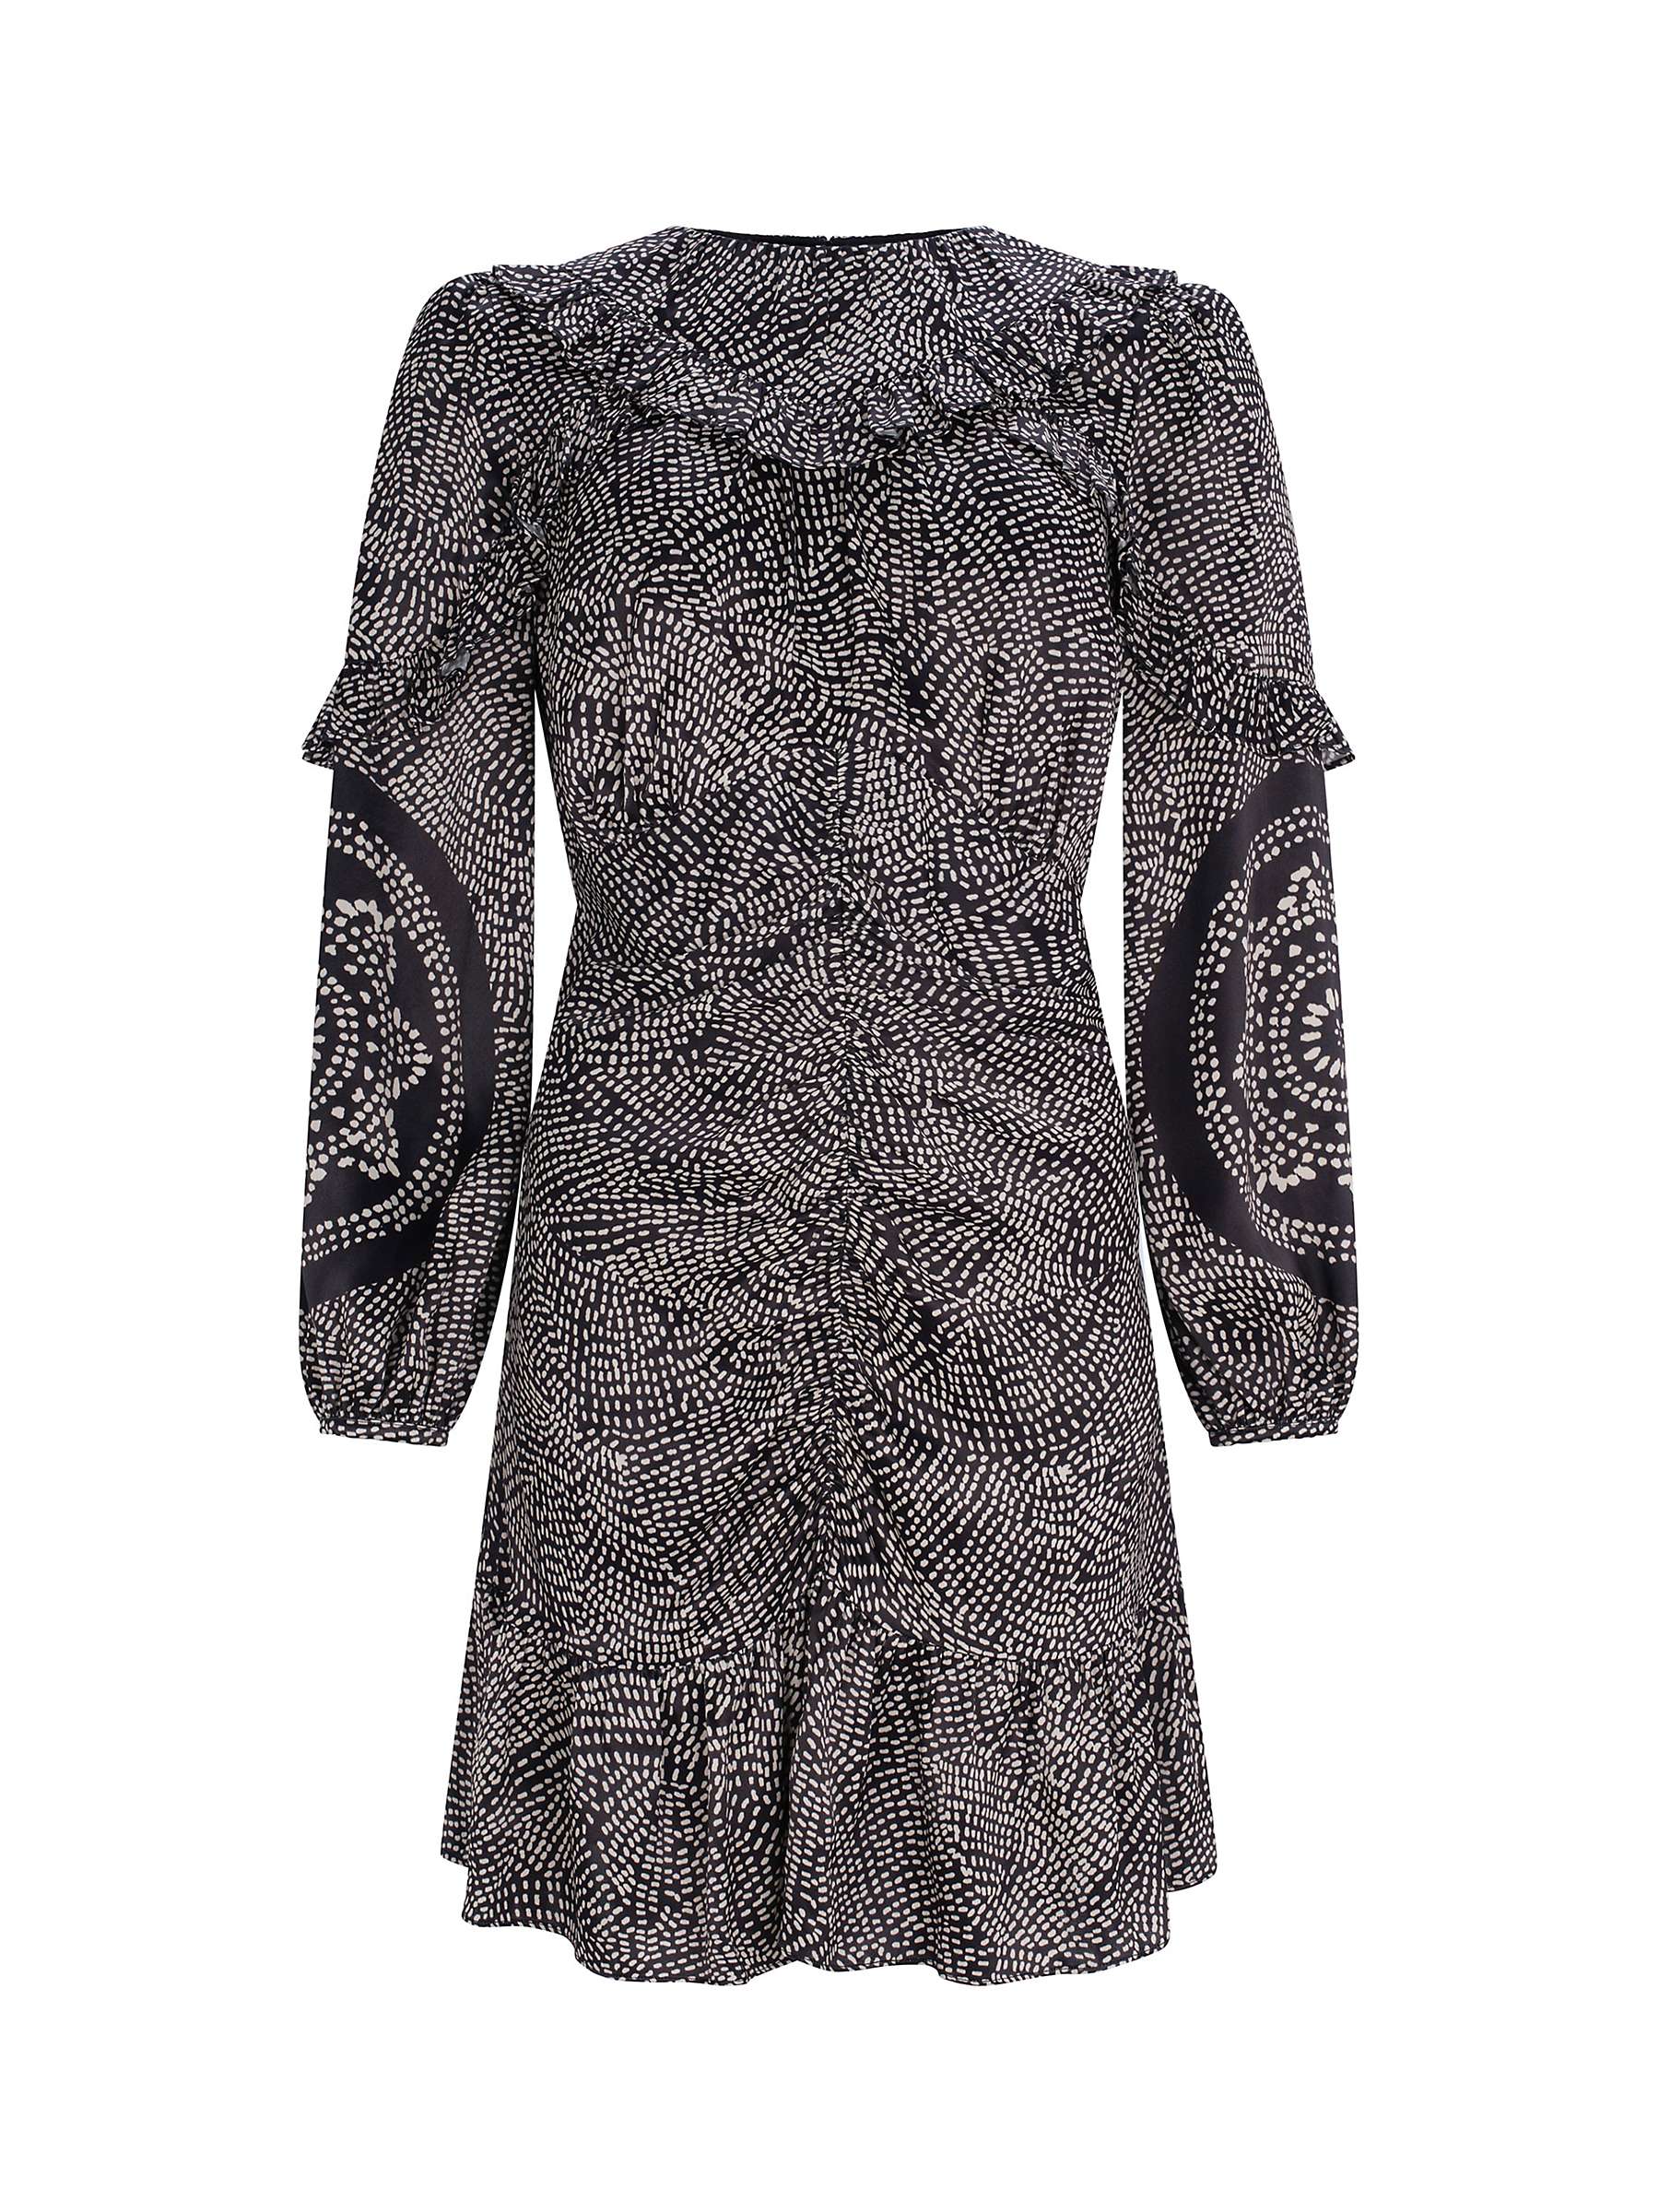 Buy Mint Velvet  Abstract Print Ruched Mini Dress Online at johnlewis.com